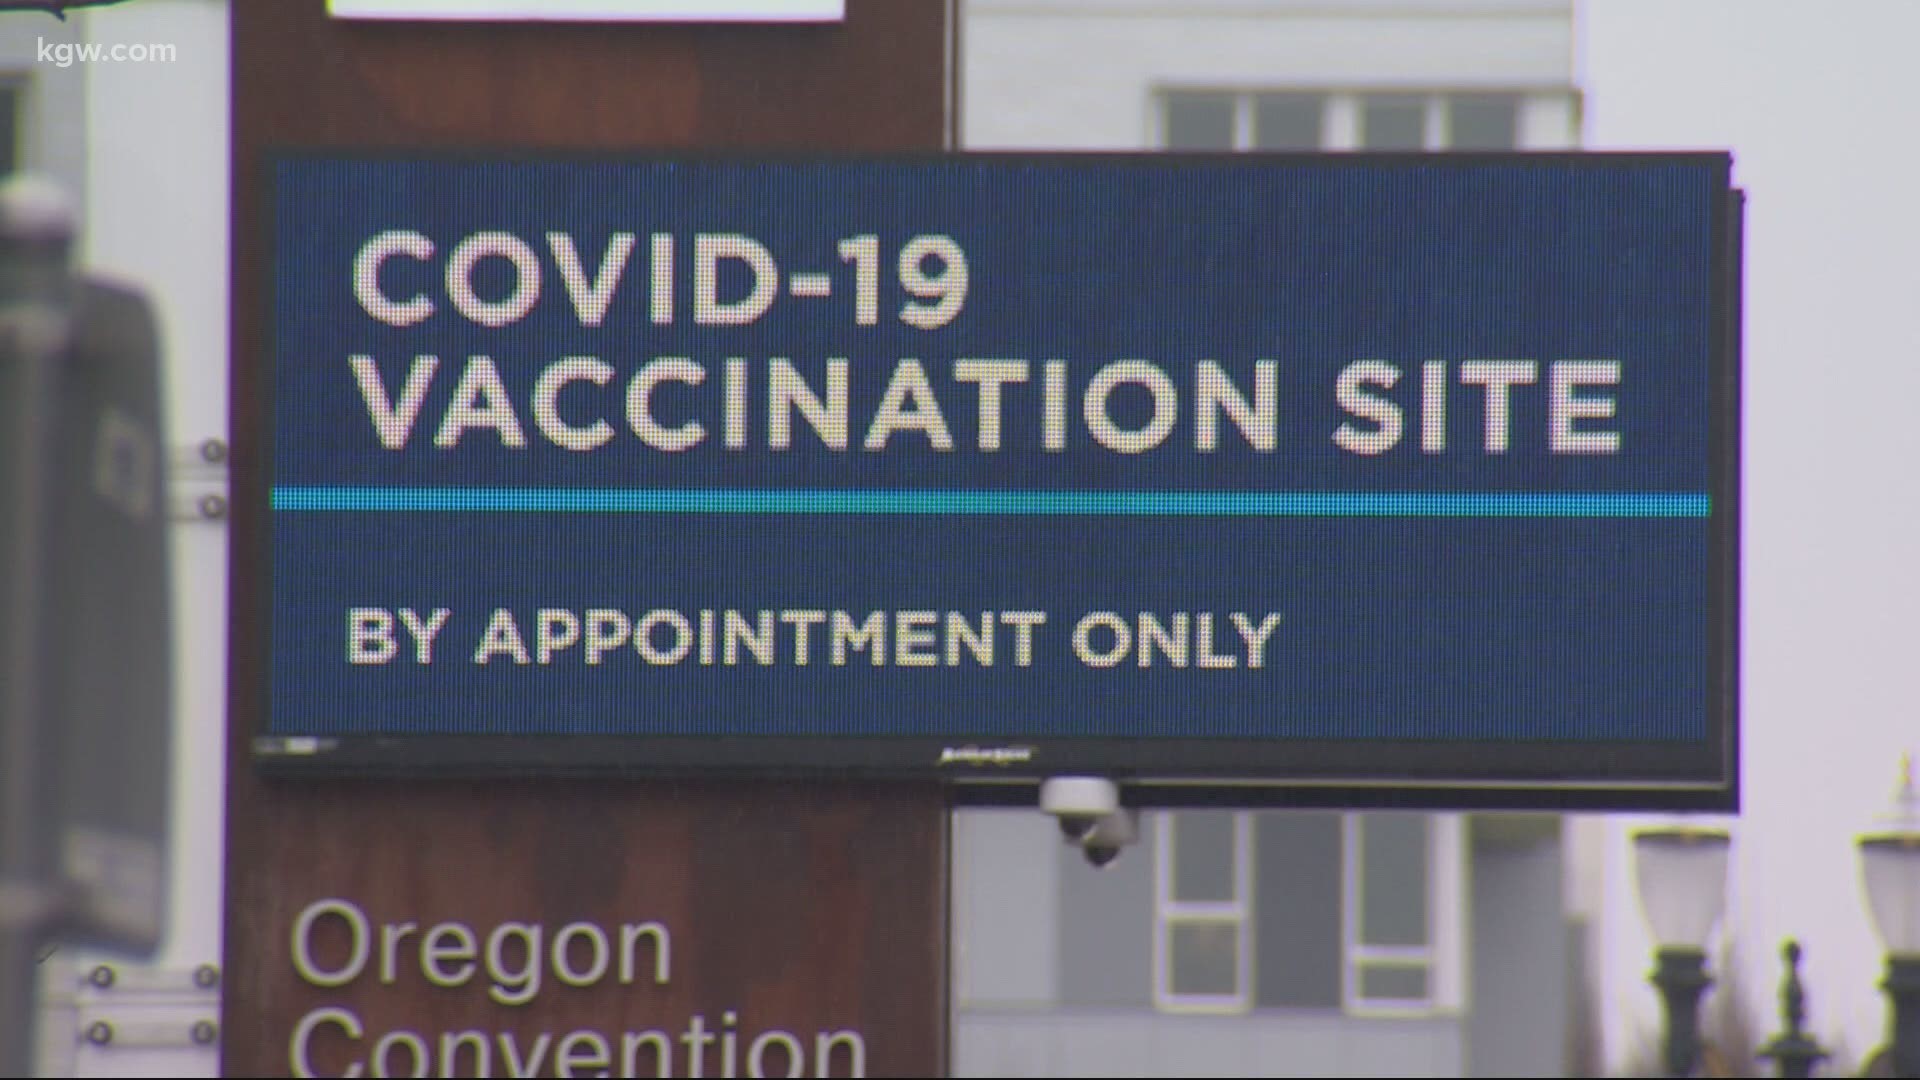 It’s been a frustrating ordeal for seniors trying to sign up for COVID vaccine appointments. Tim Gordon has the latest.